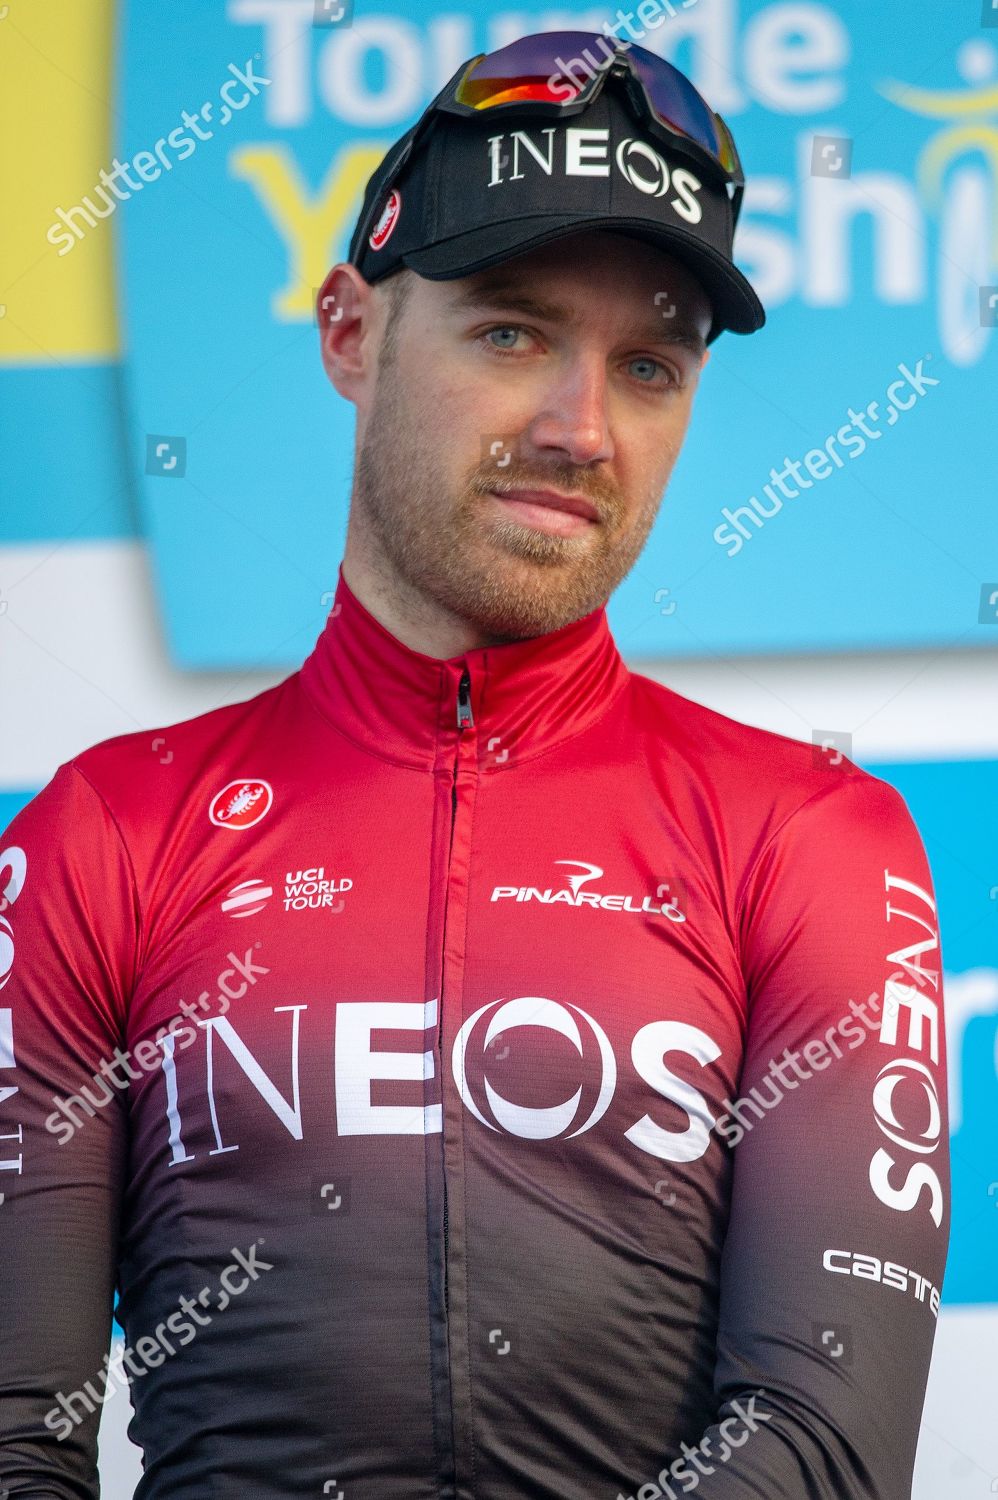 CHRIS LAWLESS TEAM INEOS ON STAGE Editorial Stock Photo